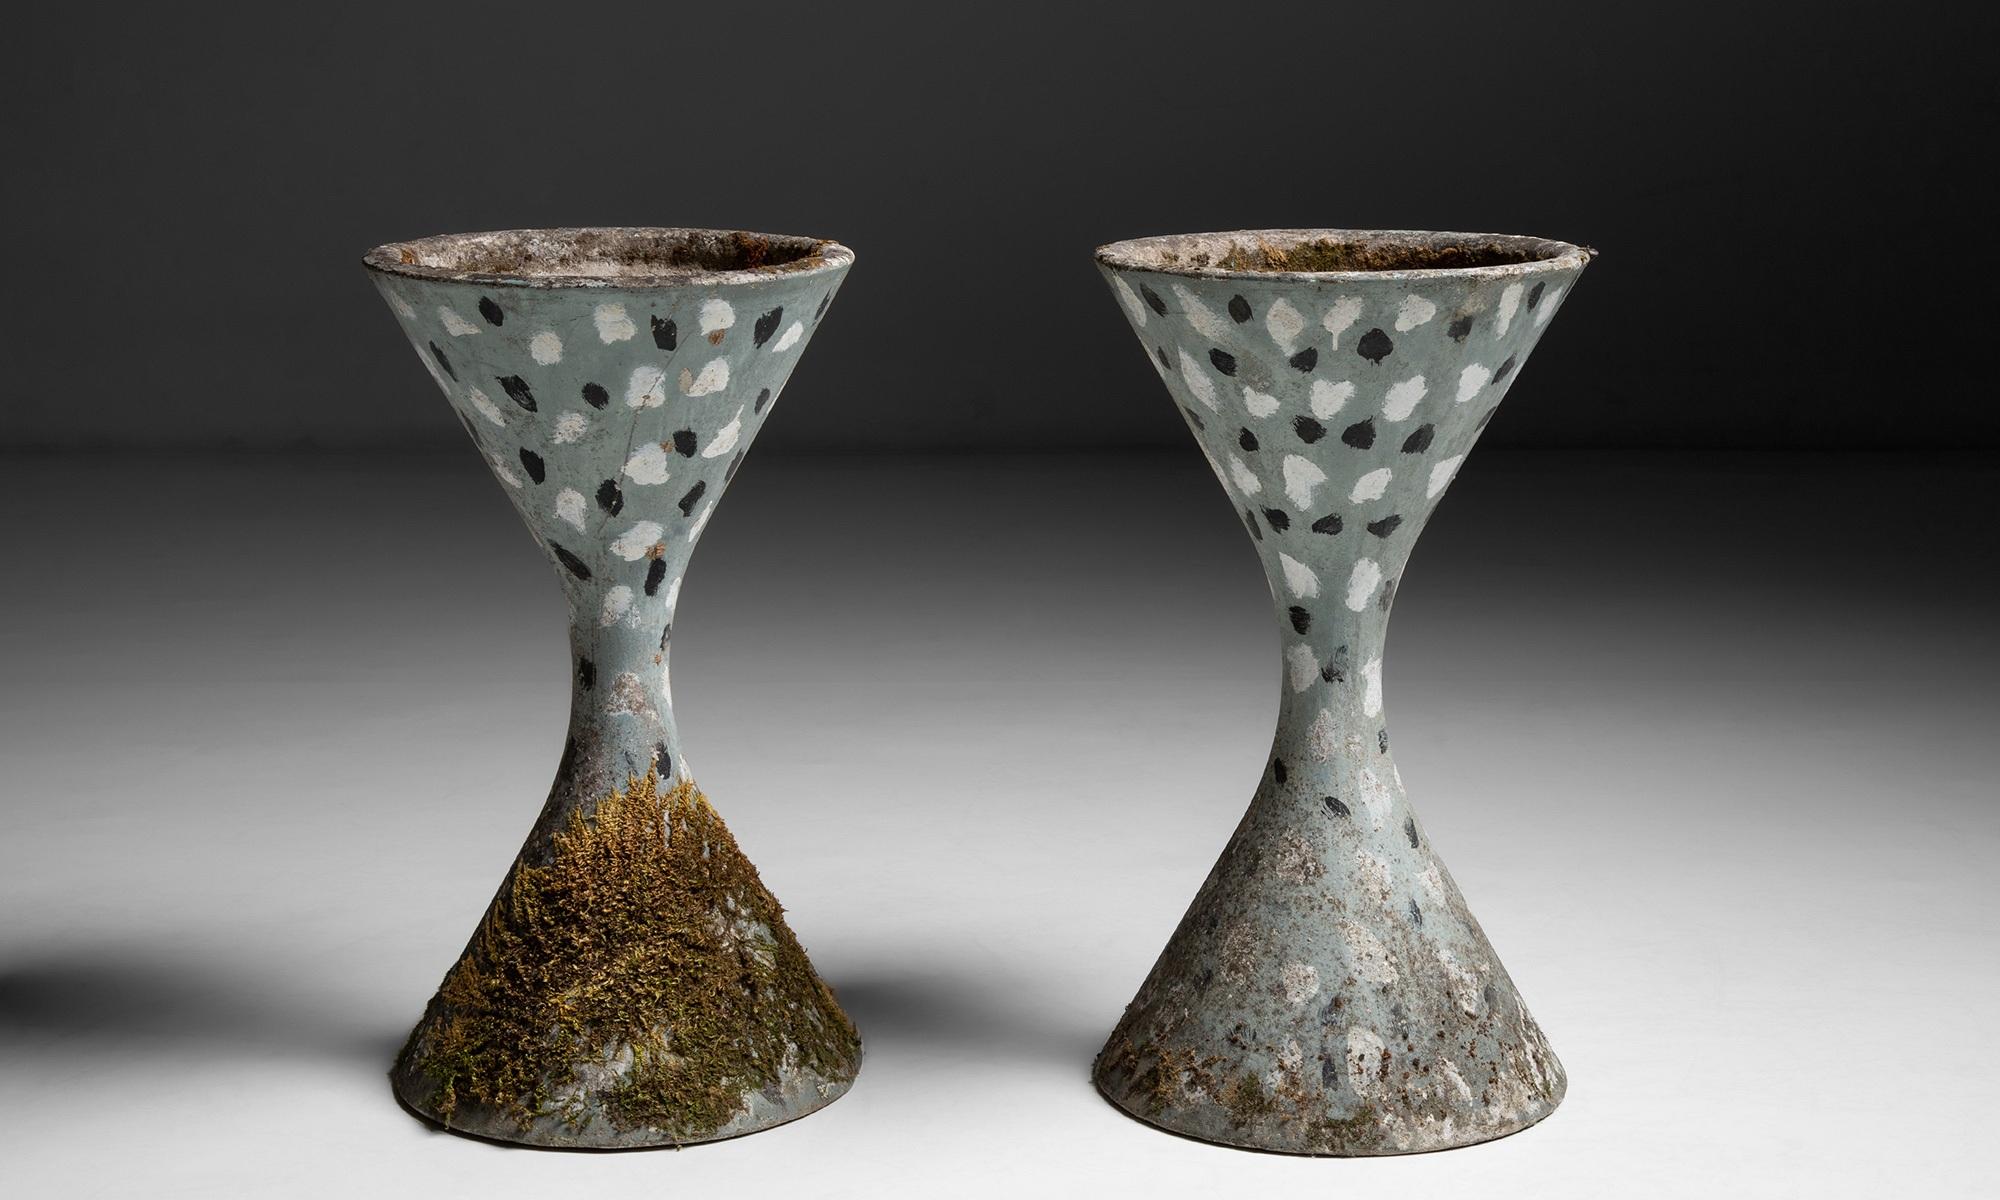 Diablo Planters by Willy Guhl

Switzerland circa 1950

Old polka dot paint decoration on hourglass form.

14.25”dia x 25.25”h